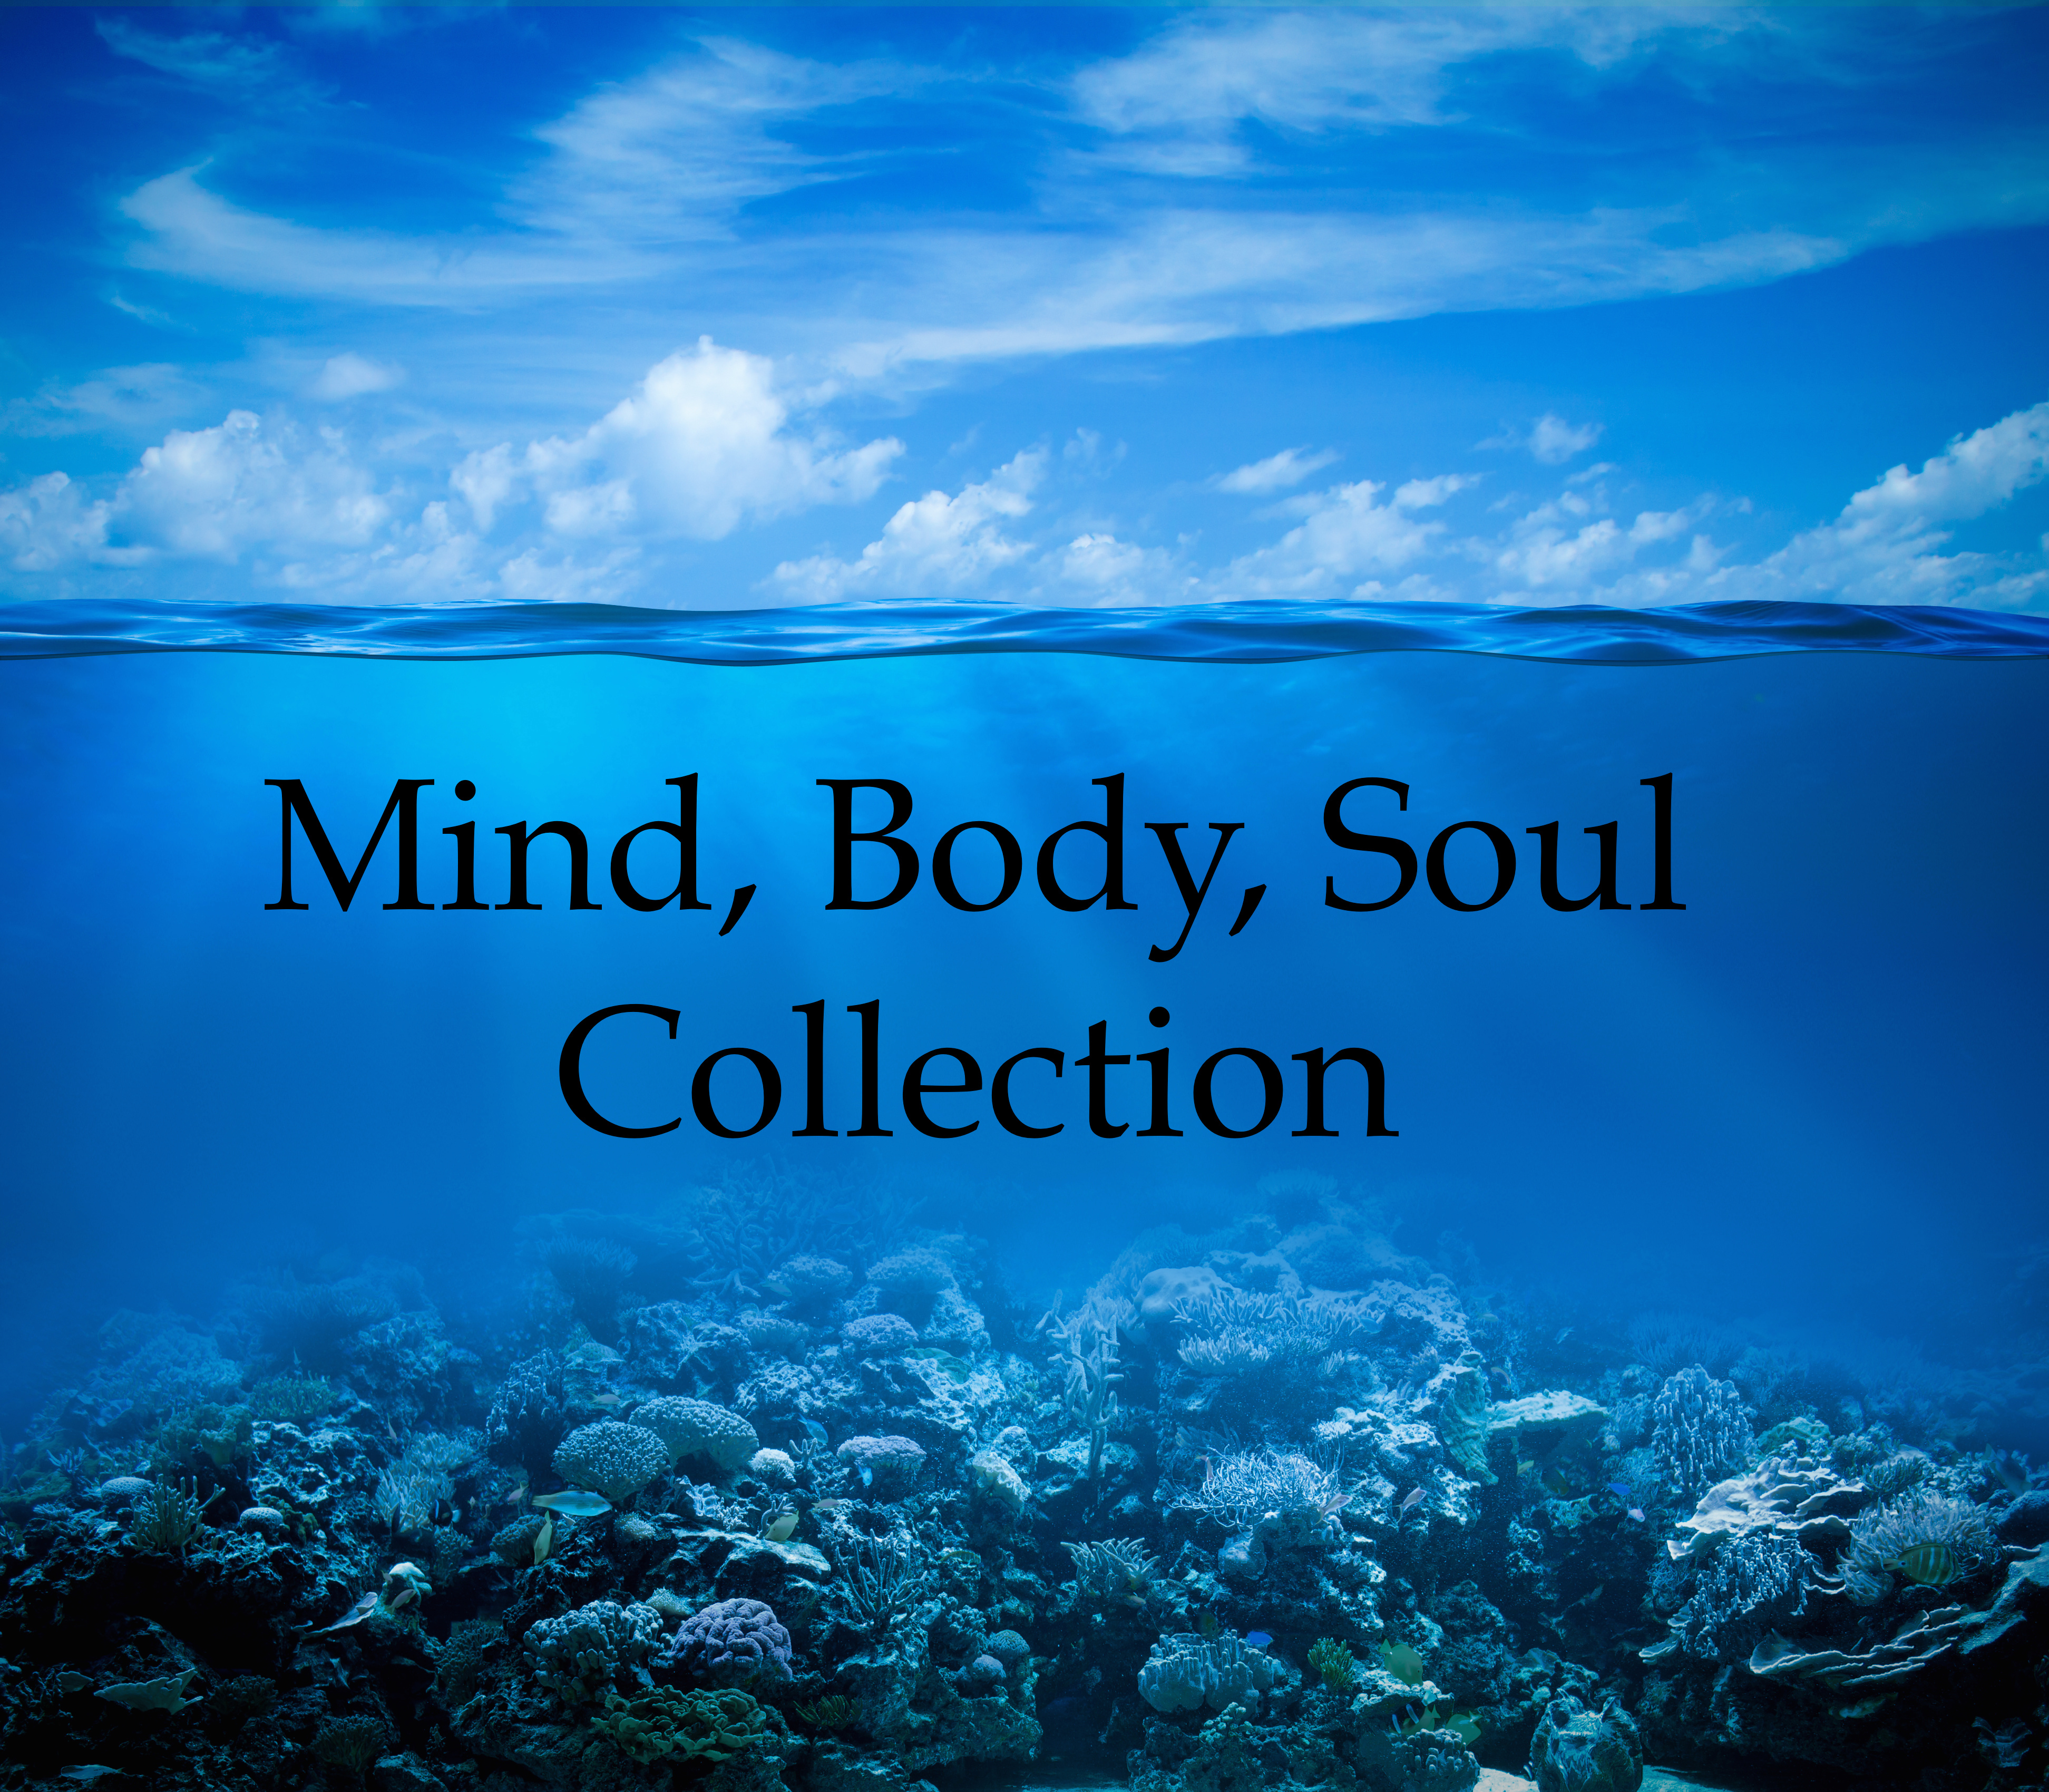 Mind, Body, Soul Collection - 20 Powerful Rain and Water Relaxation Melodies to Relieve Stress and Anxiety, Engage Deep Focus and Concentration, and Help with Meditation and a Deeper, Better Sleep